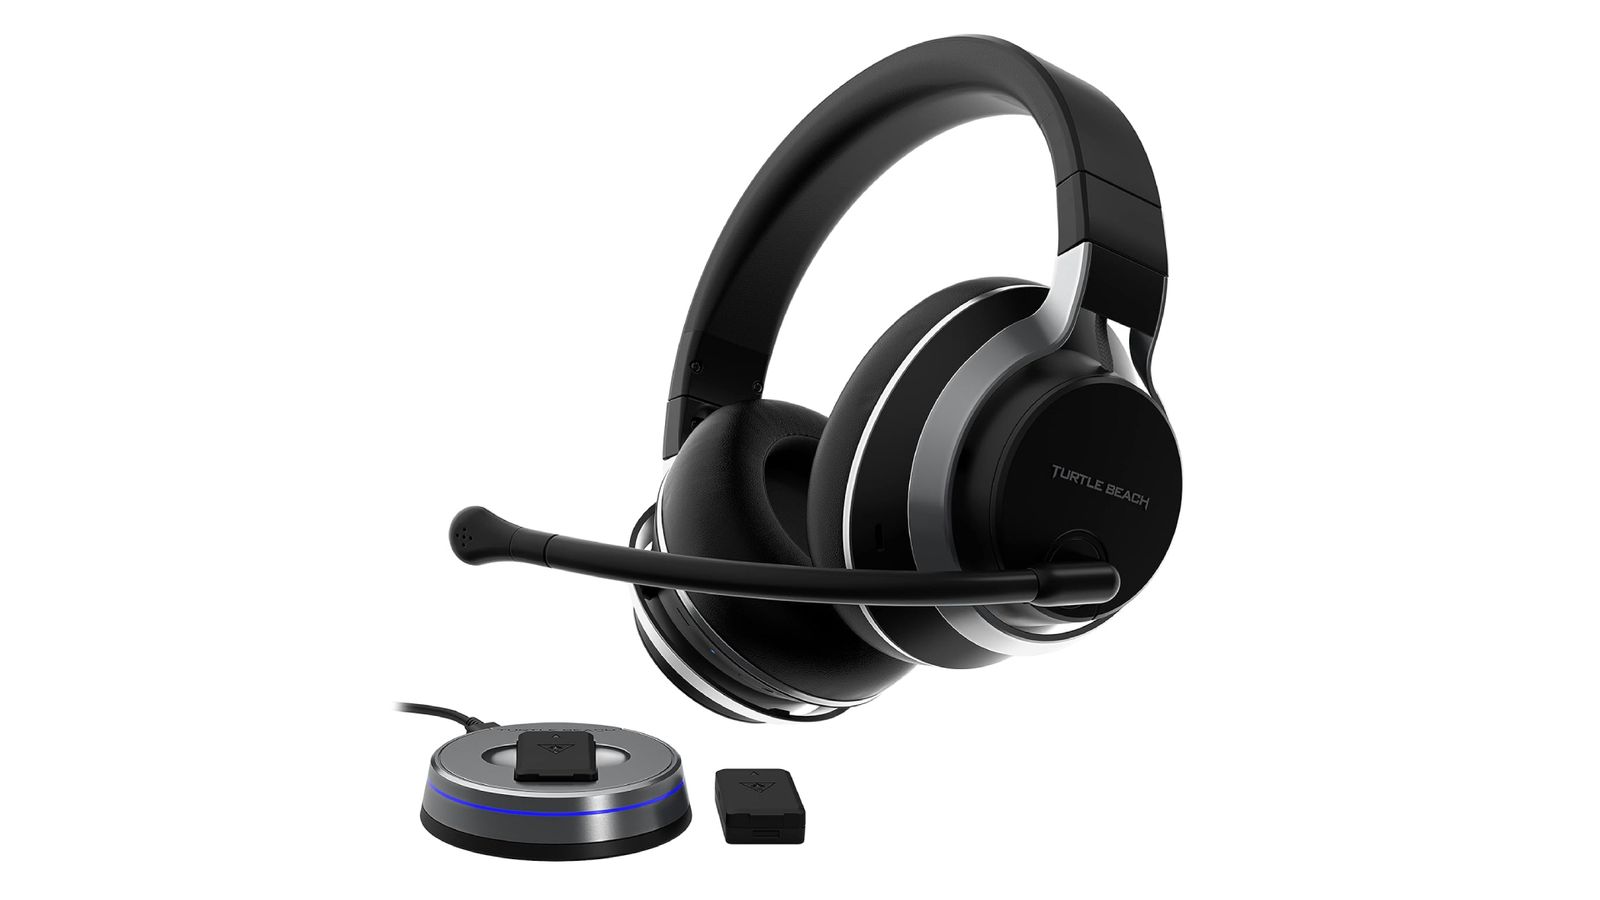 Turtle Beach Stealth Pro product image of a black wireless headset with a mic that extends around the front.